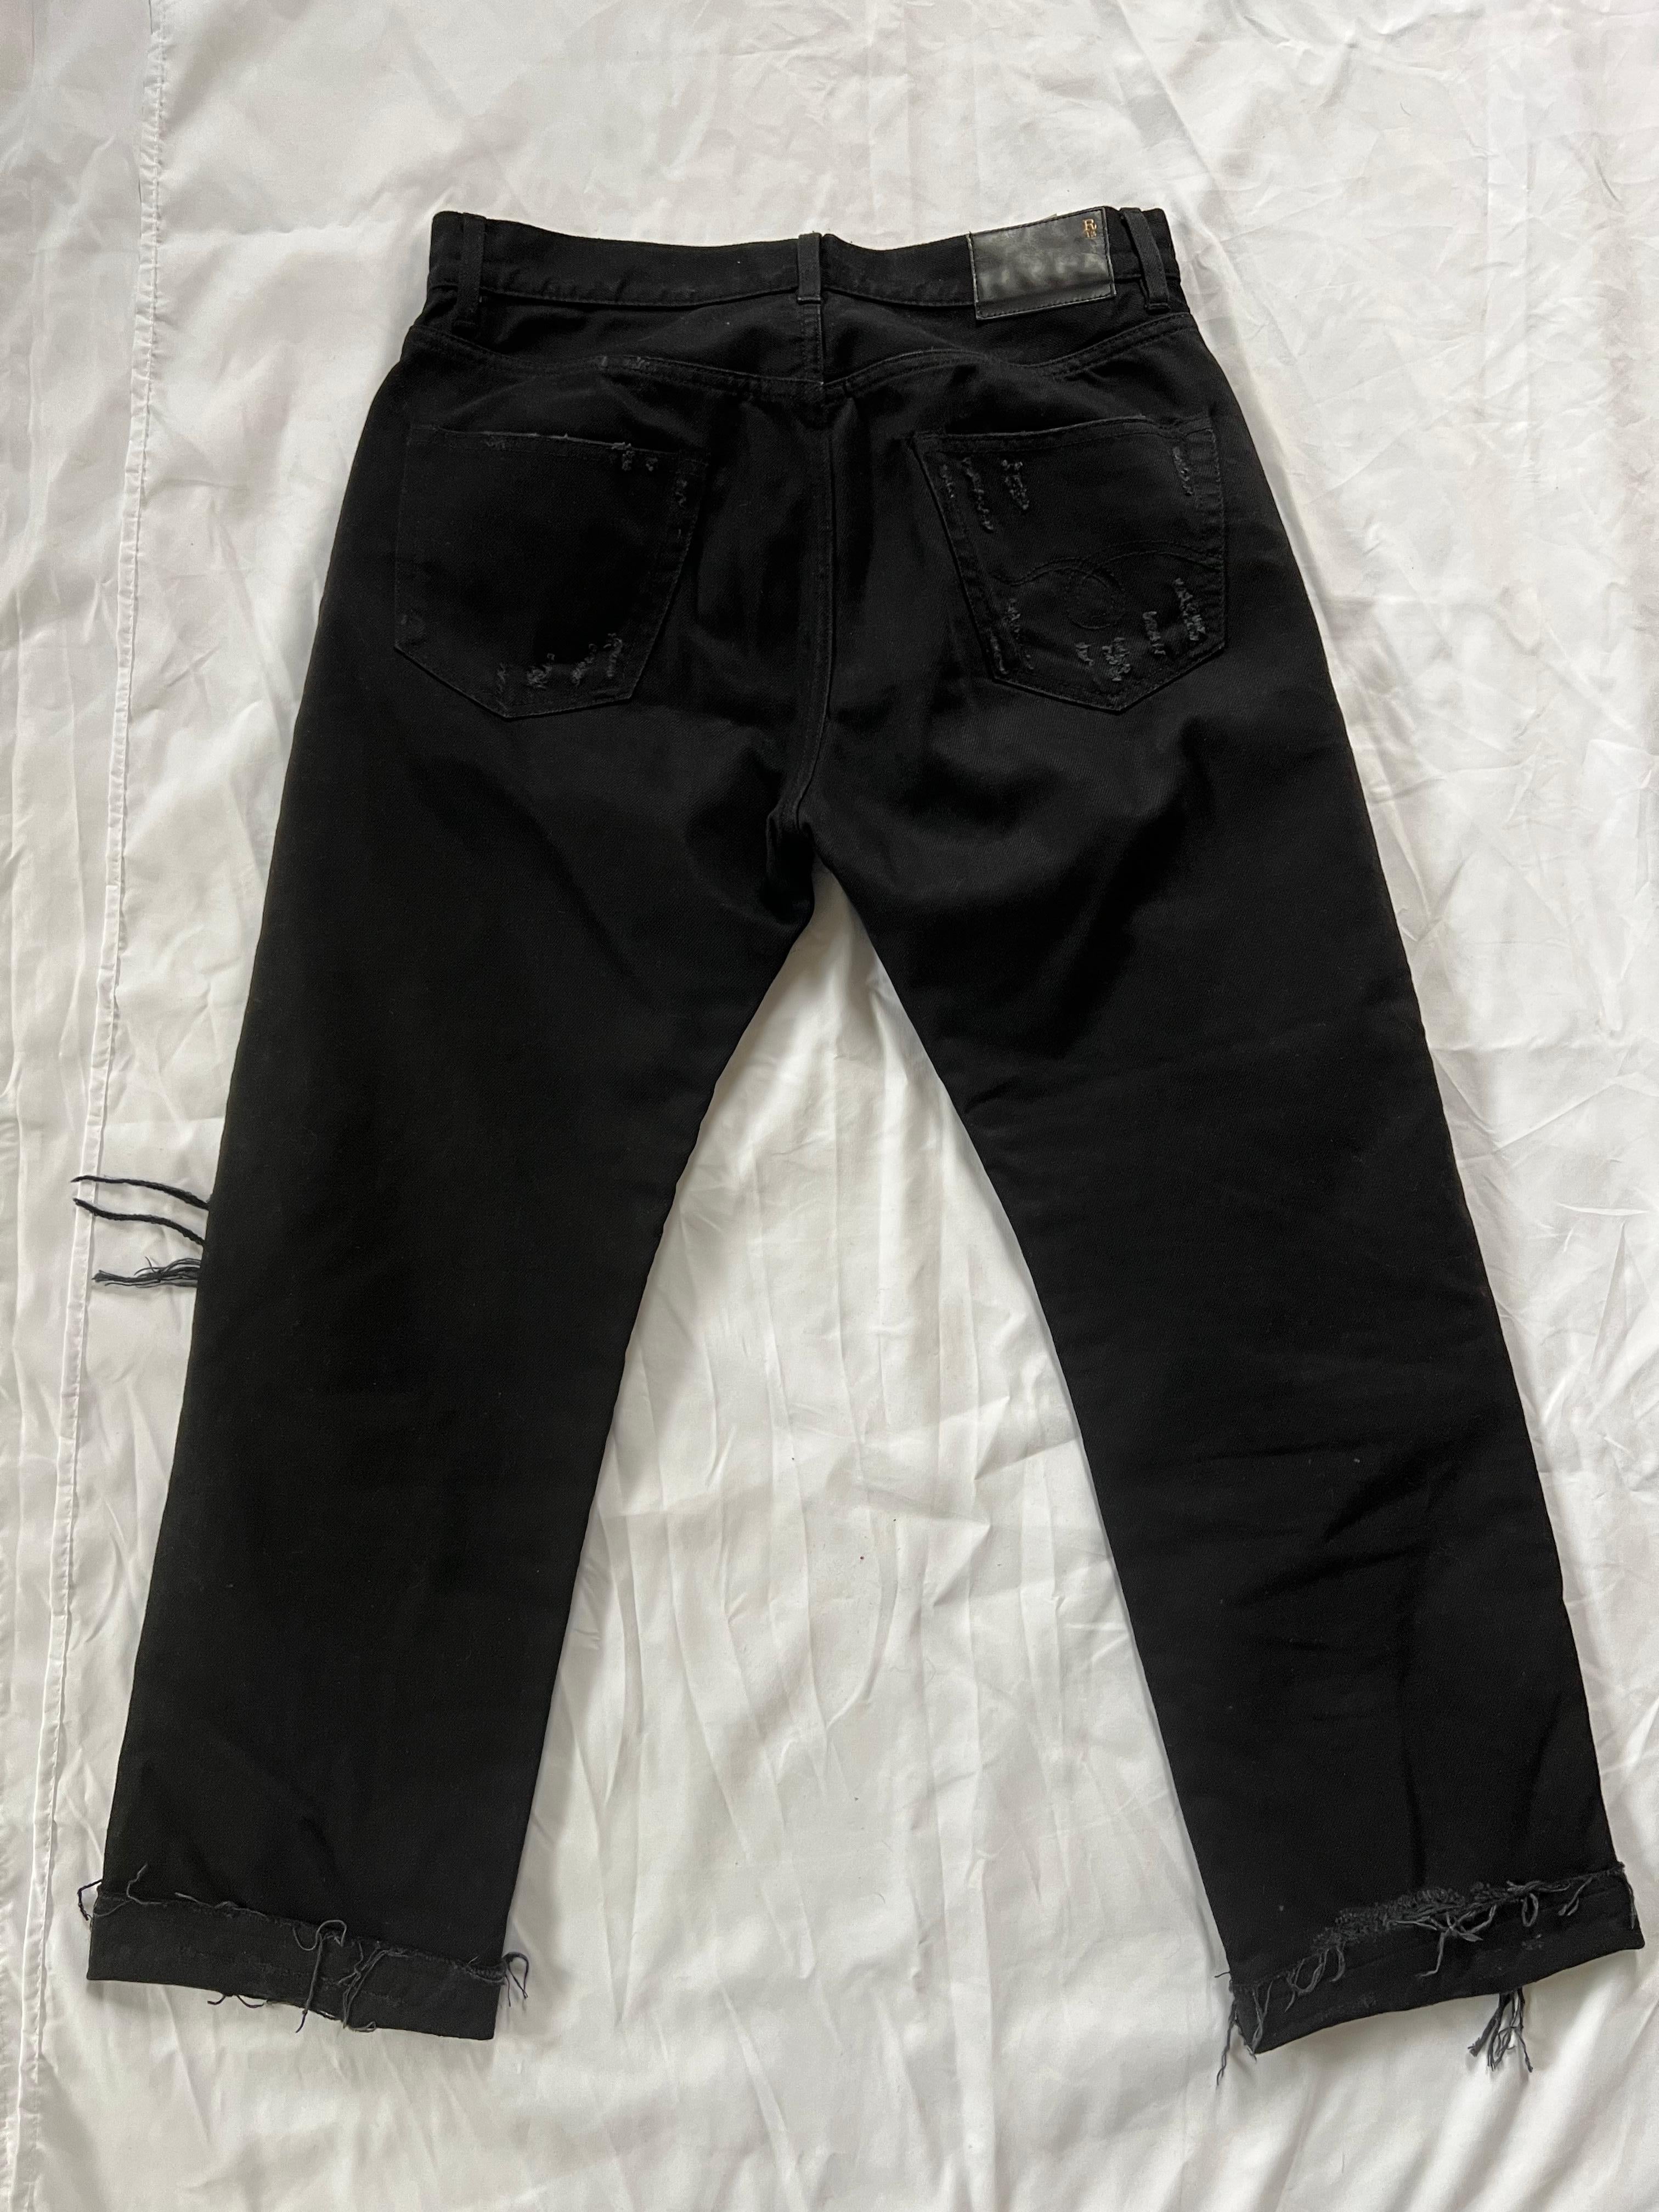 R13 Black Sequin Boyfriend Jeans Pants, Size 25 In Excellent Condition For Sale In Beverly Hills, CA